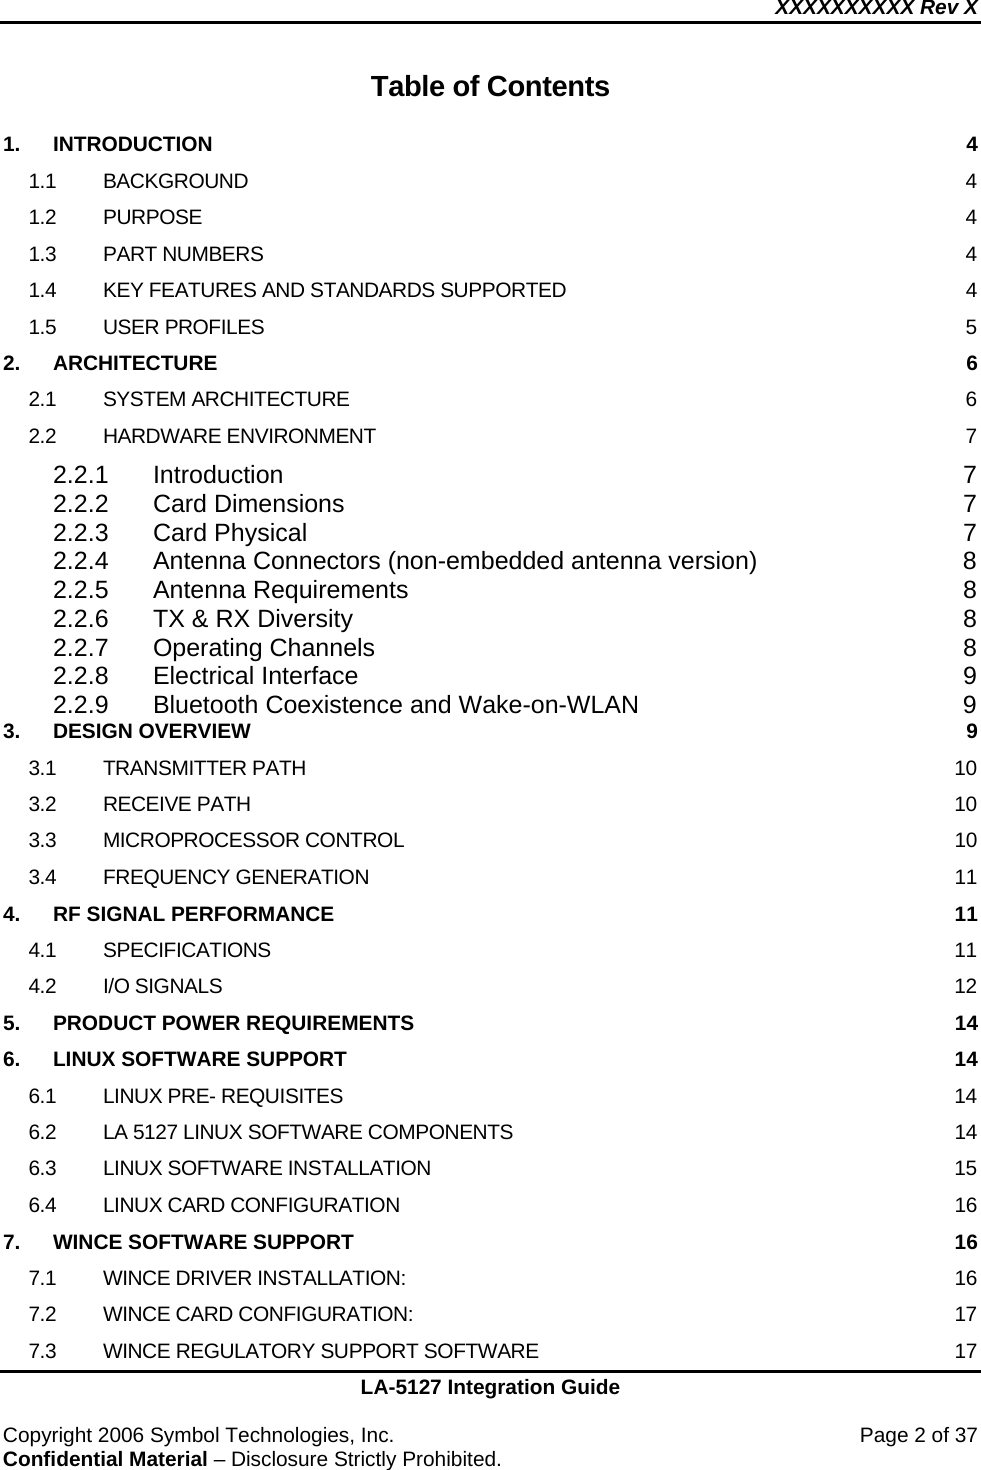 XXXXXXXXXX Rev X    LA-5127 Integration Guide  Copyright 2006 Symbol Technologies, Inc.    Page 2 of 37 Confidential Material – Disclosure Strictly Prohibited.  Table of Contents  1. INTRODUCTION  4 1.1 BACKGROUND  4 1.2 PURPOSE  4 1.3 PART NUMBERS  4 1.4 KEY FEATURES AND STANDARDS SUPPORTED  4 1.5 USER PROFILES  5 2. ARCHITECTURE  6 2.1 SYSTEM ARCHITECTURE  6 2.2 HARDWARE ENVIRONMENT  7 2.2.1 Introduction 7 2.2.2 Card Dimensions  7 2.2.3 Card Physical  7 2.2.4 Antenna Connectors (non-embedded antenna version)  8 2.2.5 Antenna Requirements  8 2.2.6 TX &amp; RX Diversity  8 2.2.7 Operating Channels  8 2.2.8 Electrical Interface  9 2.2.9 Bluetooth Coexistence and Wake-on-WLAN  9 3. DESIGN OVERVIEW  9 3.1 TRANSMITTER PATH  10 3.2 RECEIVE PATH  10 3.3 MICROPROCESSOR CONTROL  10 3.4 FREQUENCY GENERATION  11 4. RF SIGNAL PERFORMANCE  11 4.1 SPECIFICATIONS  11 4.2 I/O SIGNALS  12 5. PRODUCT POWER REQUIREMENTS  14 6. LINUX SOFTWARE SUPPORT  14 6.1 LINUX PRE- REQUISITES  14 6.2 LA 5127 LINUX SOFTWARE COMPONENTS  14 6.3 LINUX SOFTWARE INSTALLATION  15 6.4 LINUX CARD CONFIGURATION  16 7. WINCE SOFTWARE SUPPORT  16 7.1 WINCE DRIVER INSTALLATION:  16 7.2 WINCE CARD CONFIGURATION:  17 7.3 WINCE REGULATORY SUPPORT SOFTWARE  17 